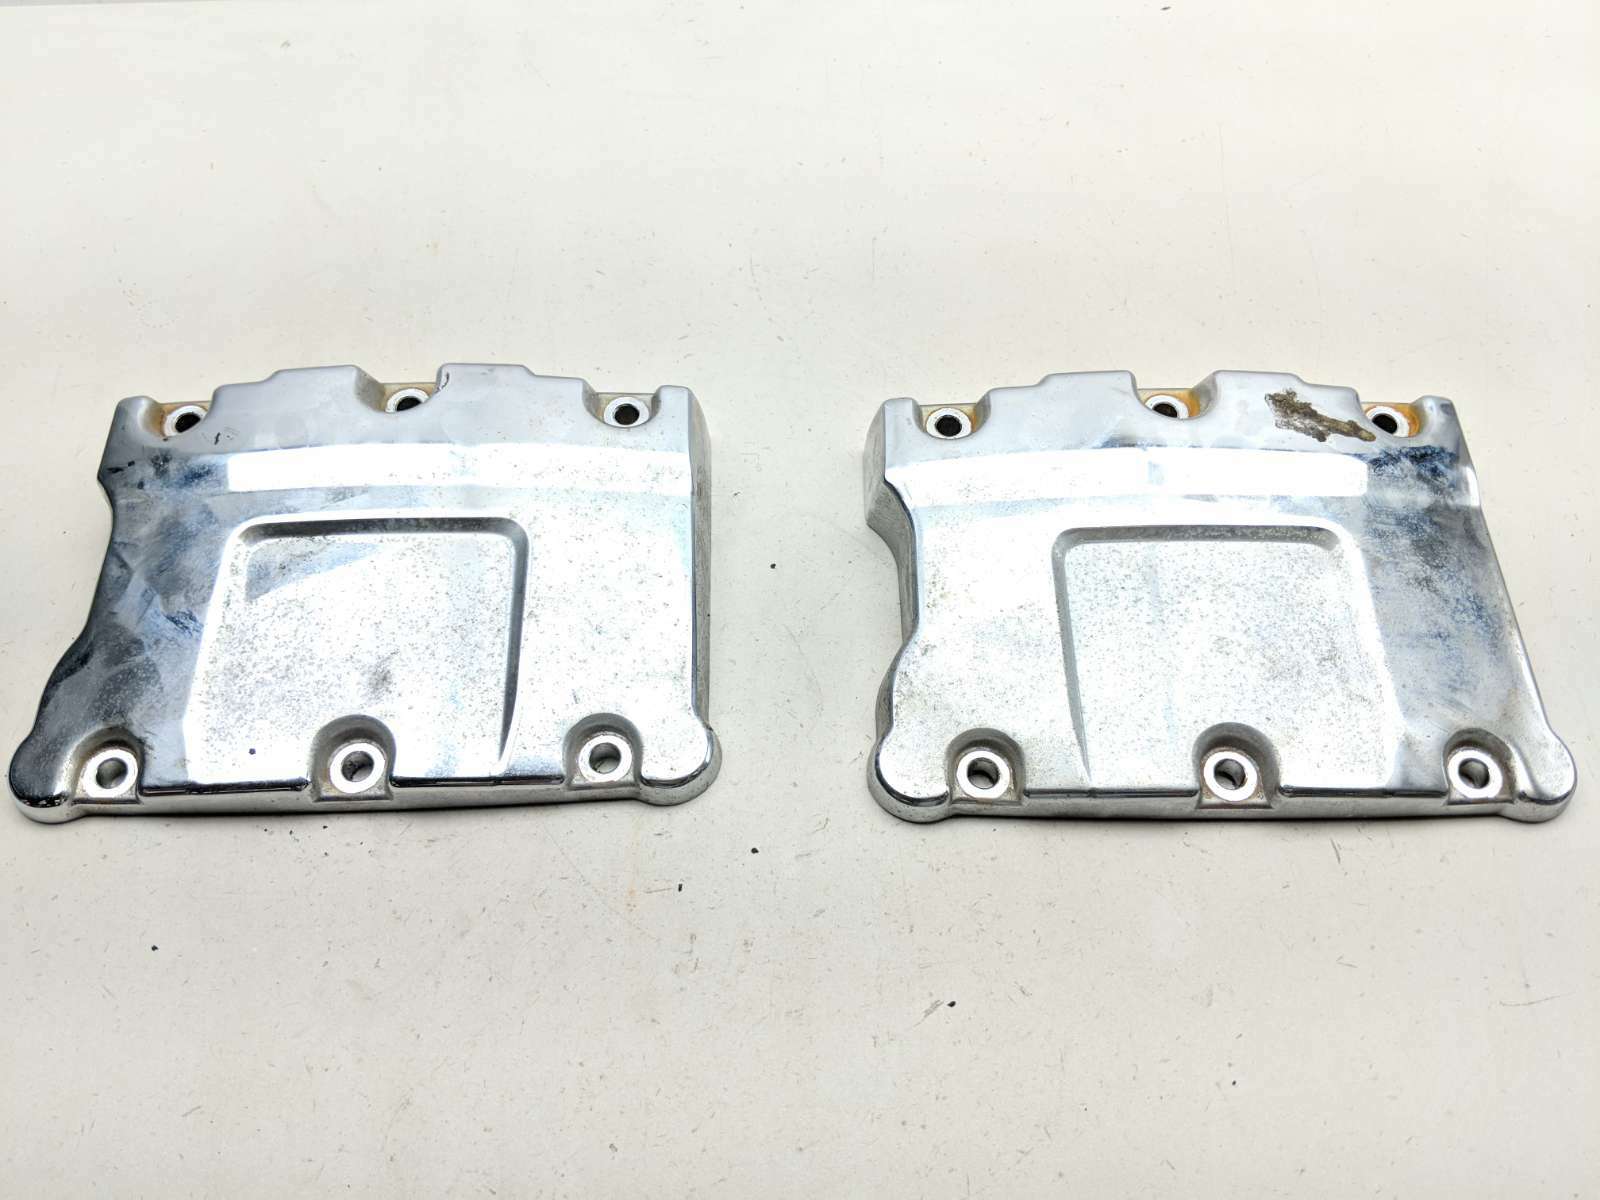 02 Harley Ultra Classic Electra Glide FLHTCUI Engine Motor Cylinder Head Covers